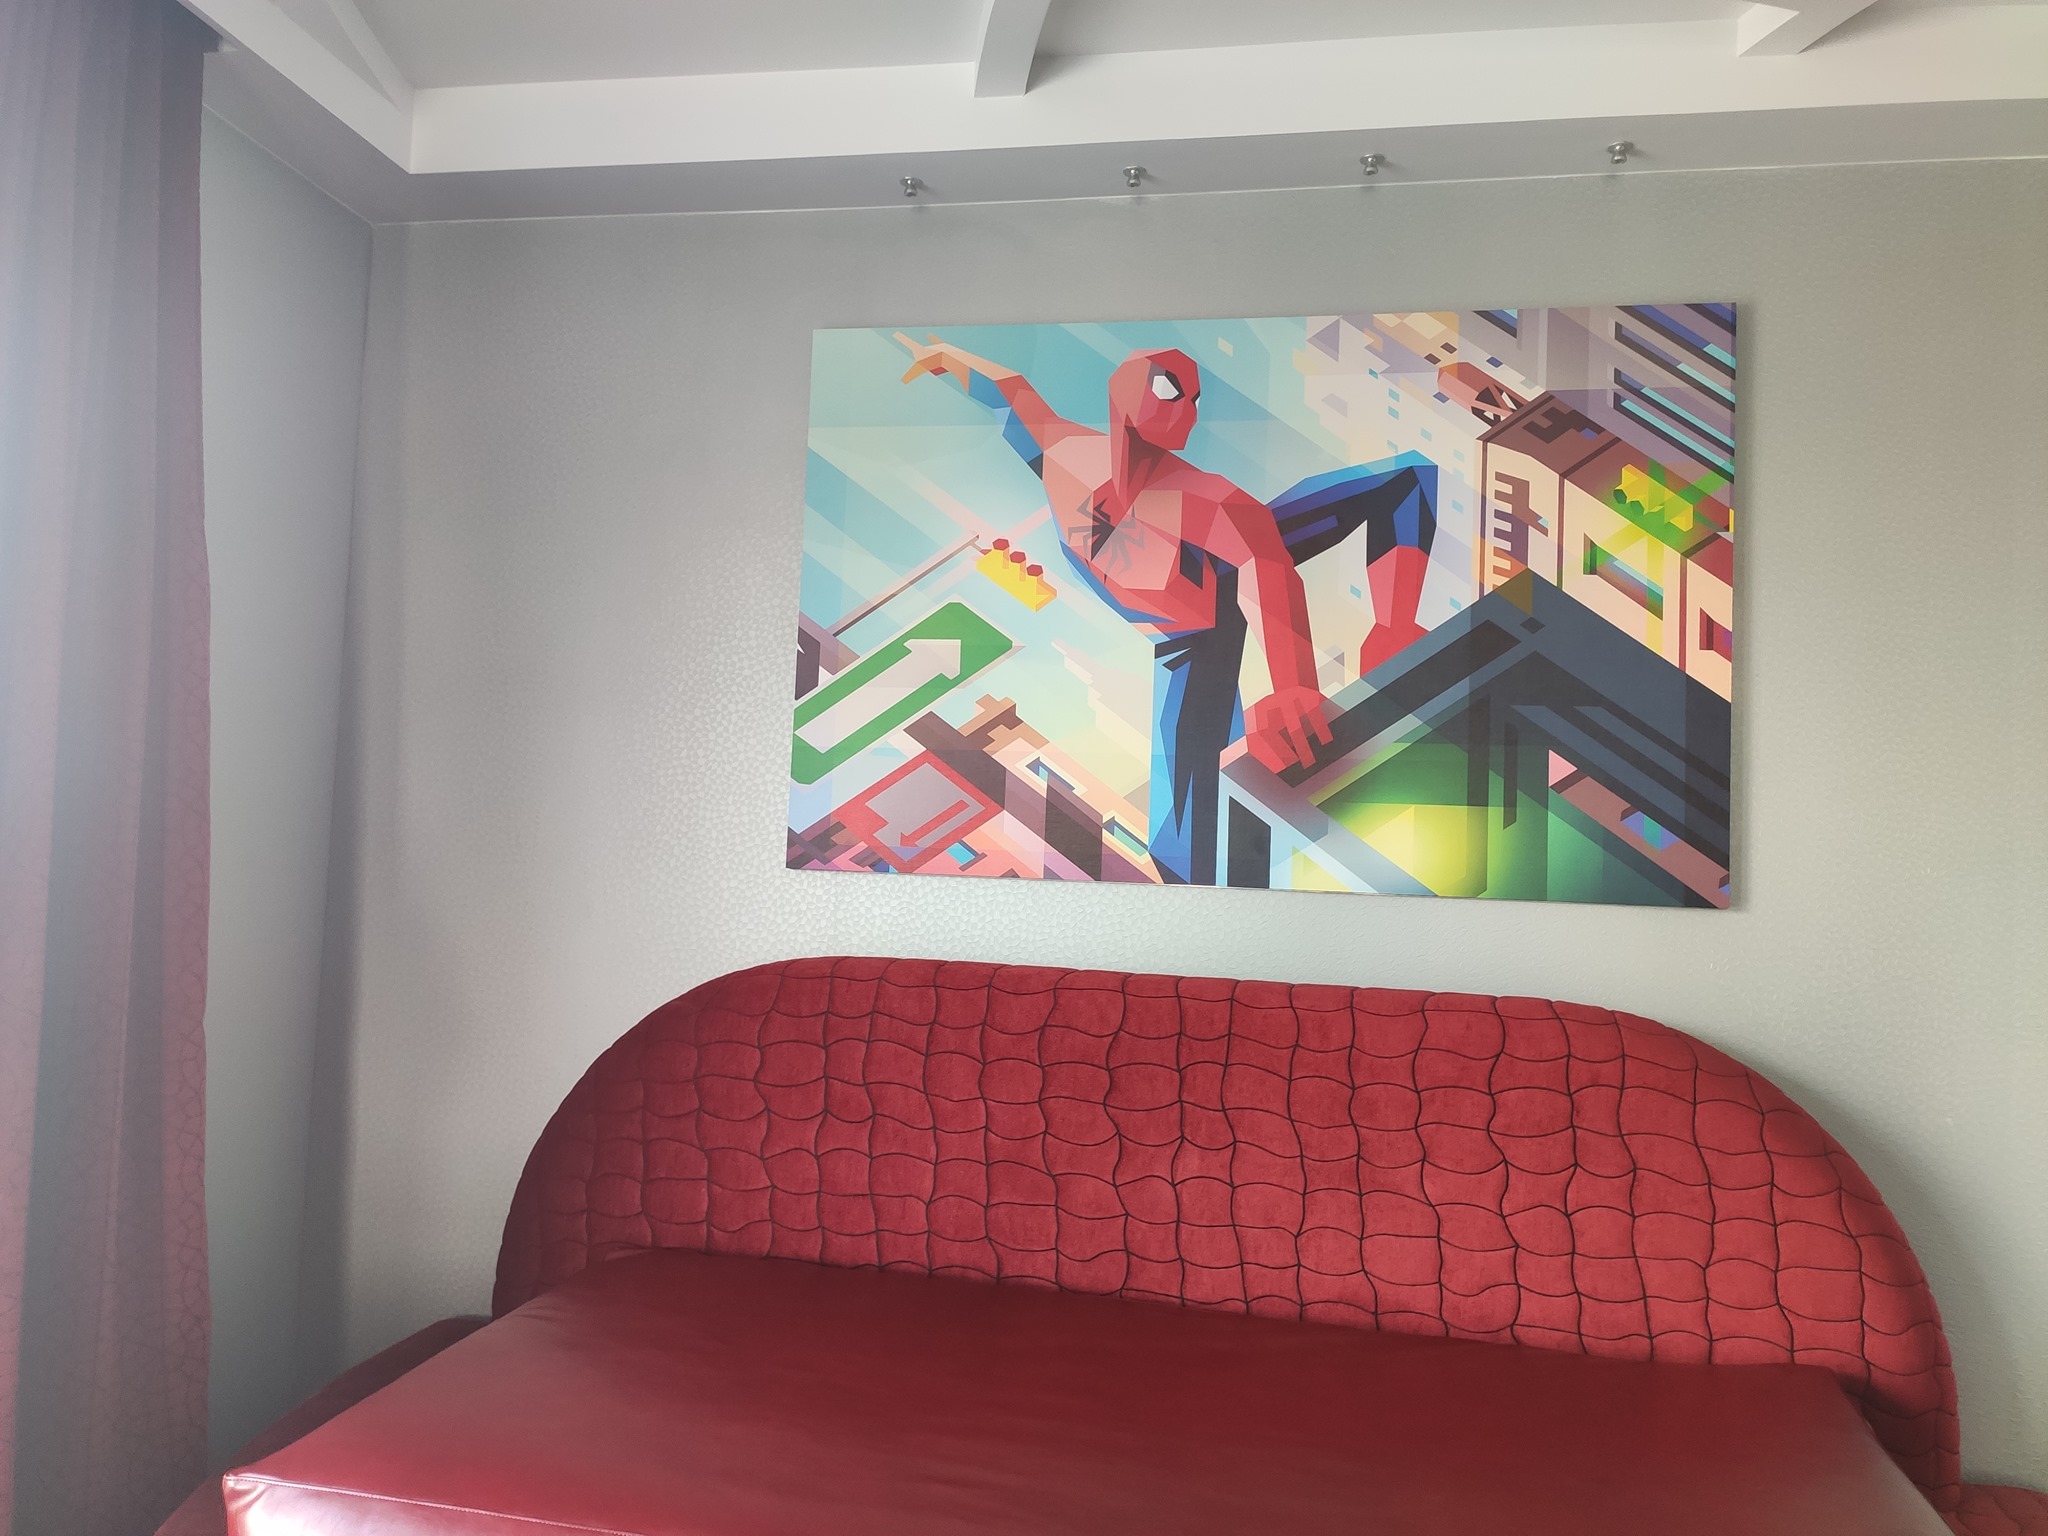 Suite Spiderman (lithographie) - Disney's Hotel New York - The Art of Marvel